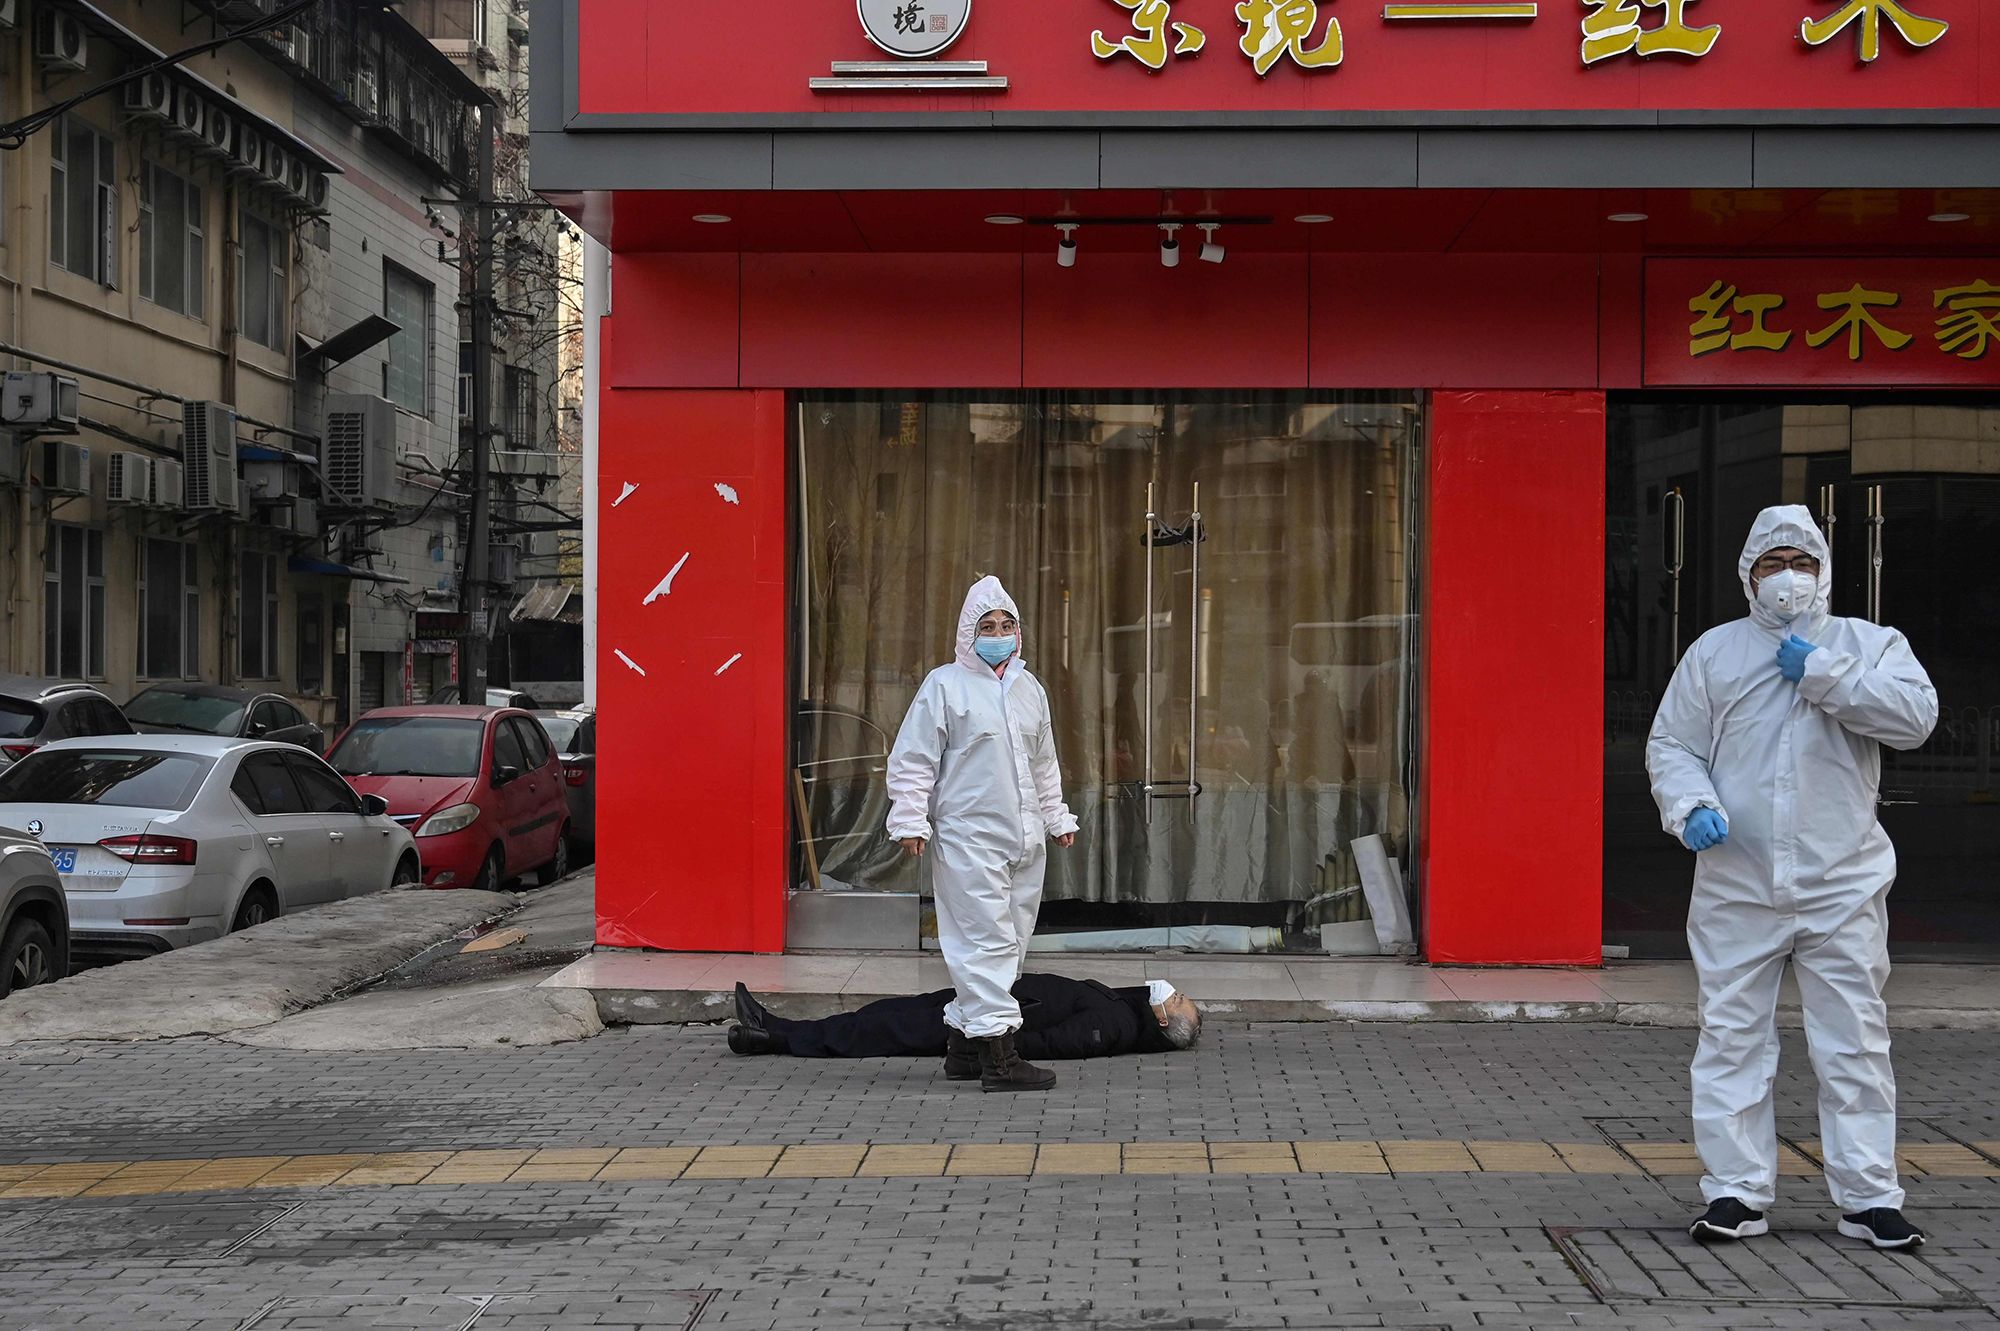 Officials stand near on elderly man who collapsed and died on a street near a hospital in Wuhan, China, on Jan. 30, 2020.